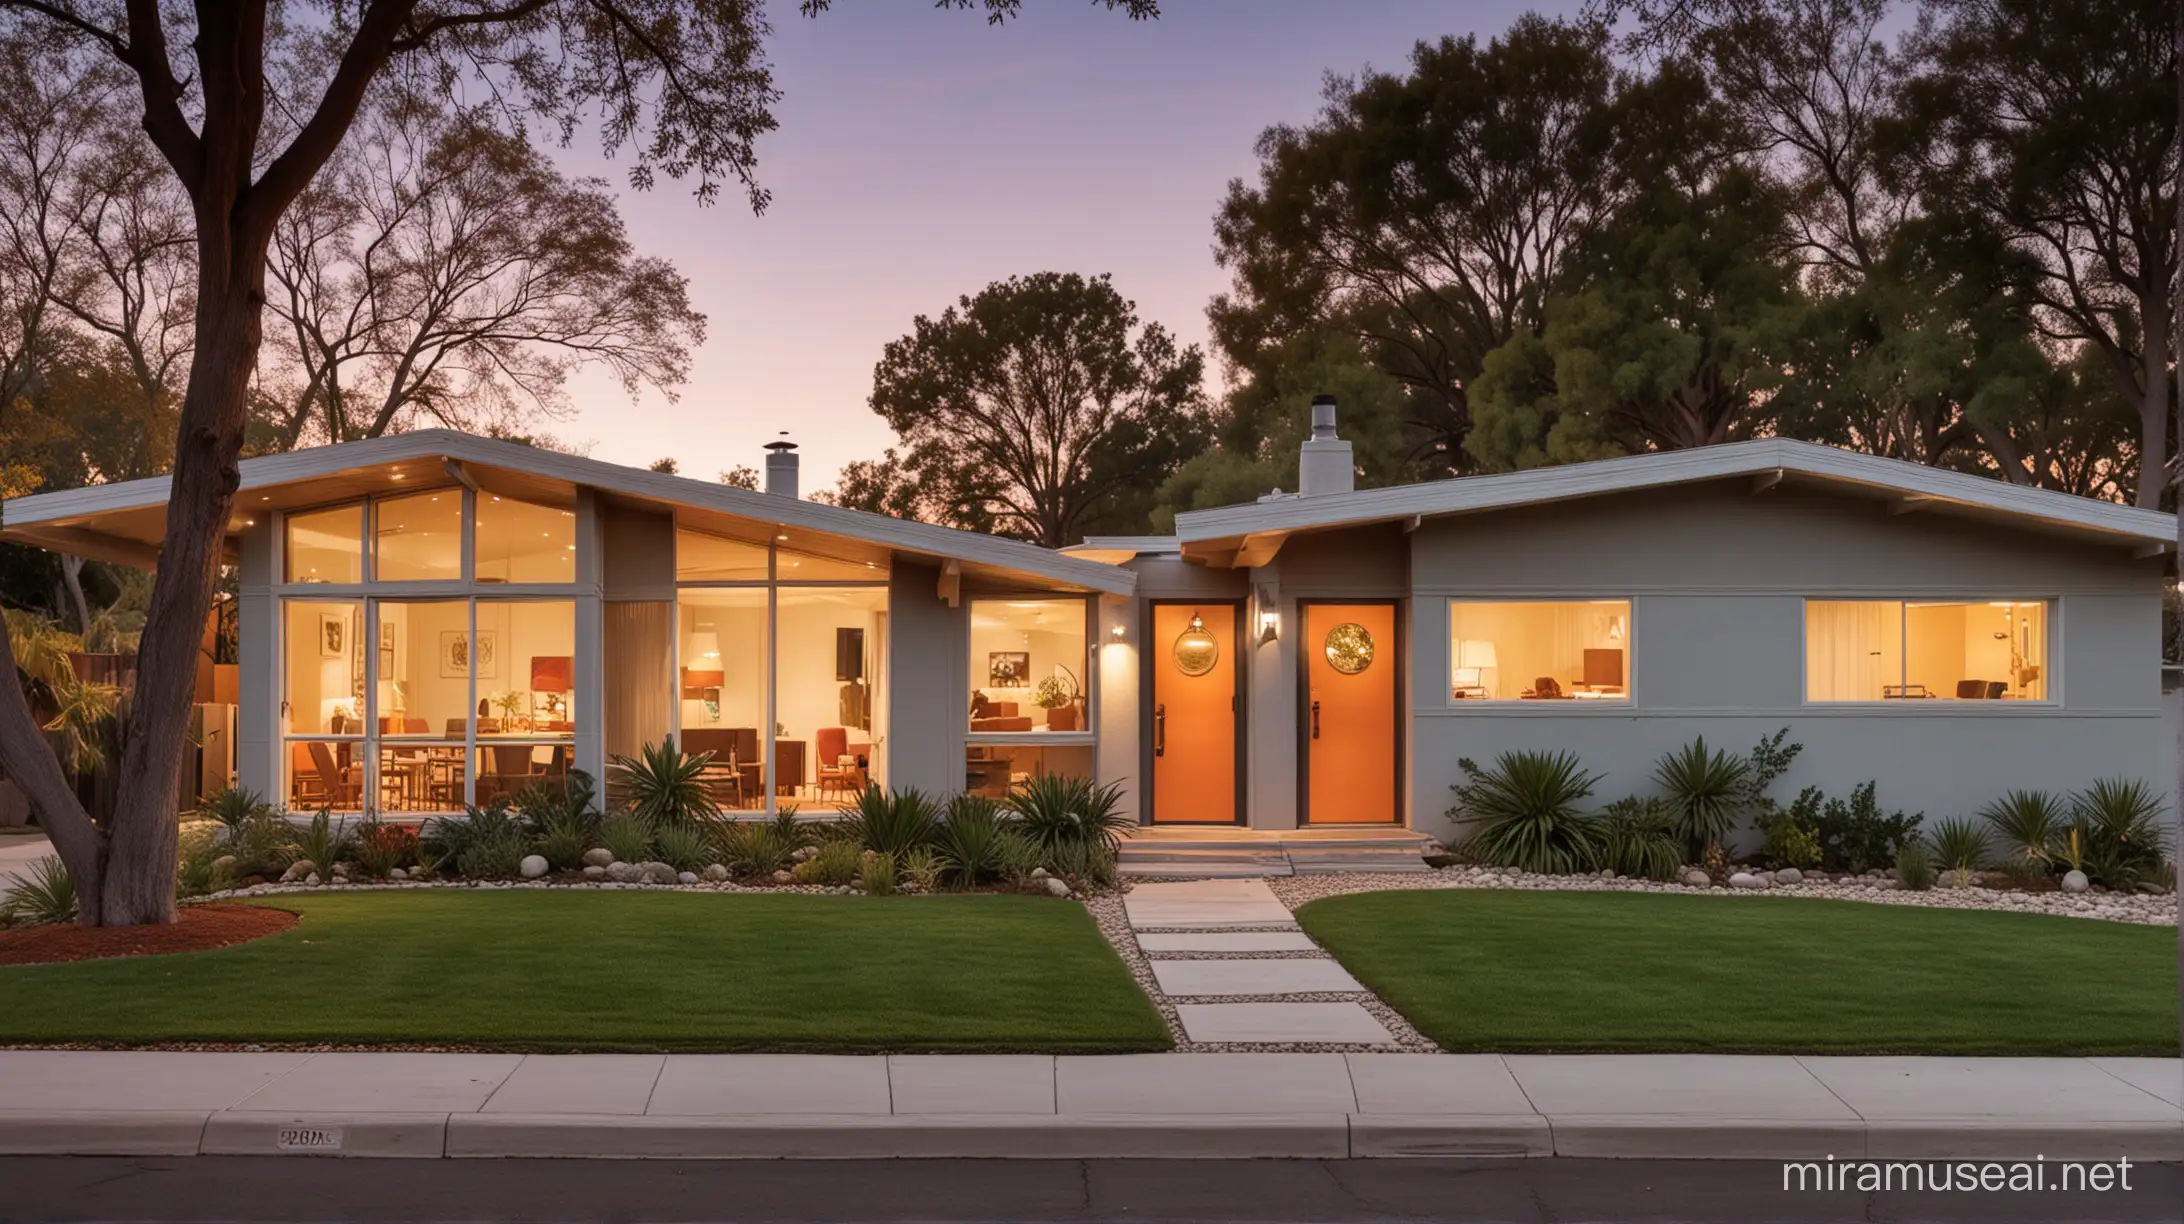 Mid-Century modern home exterior front photo vintage photographed now full color and well lit twilight Case study house professional magazine quality natural light Architectural Digest Atomic Ranch Dwell people in the photo family


